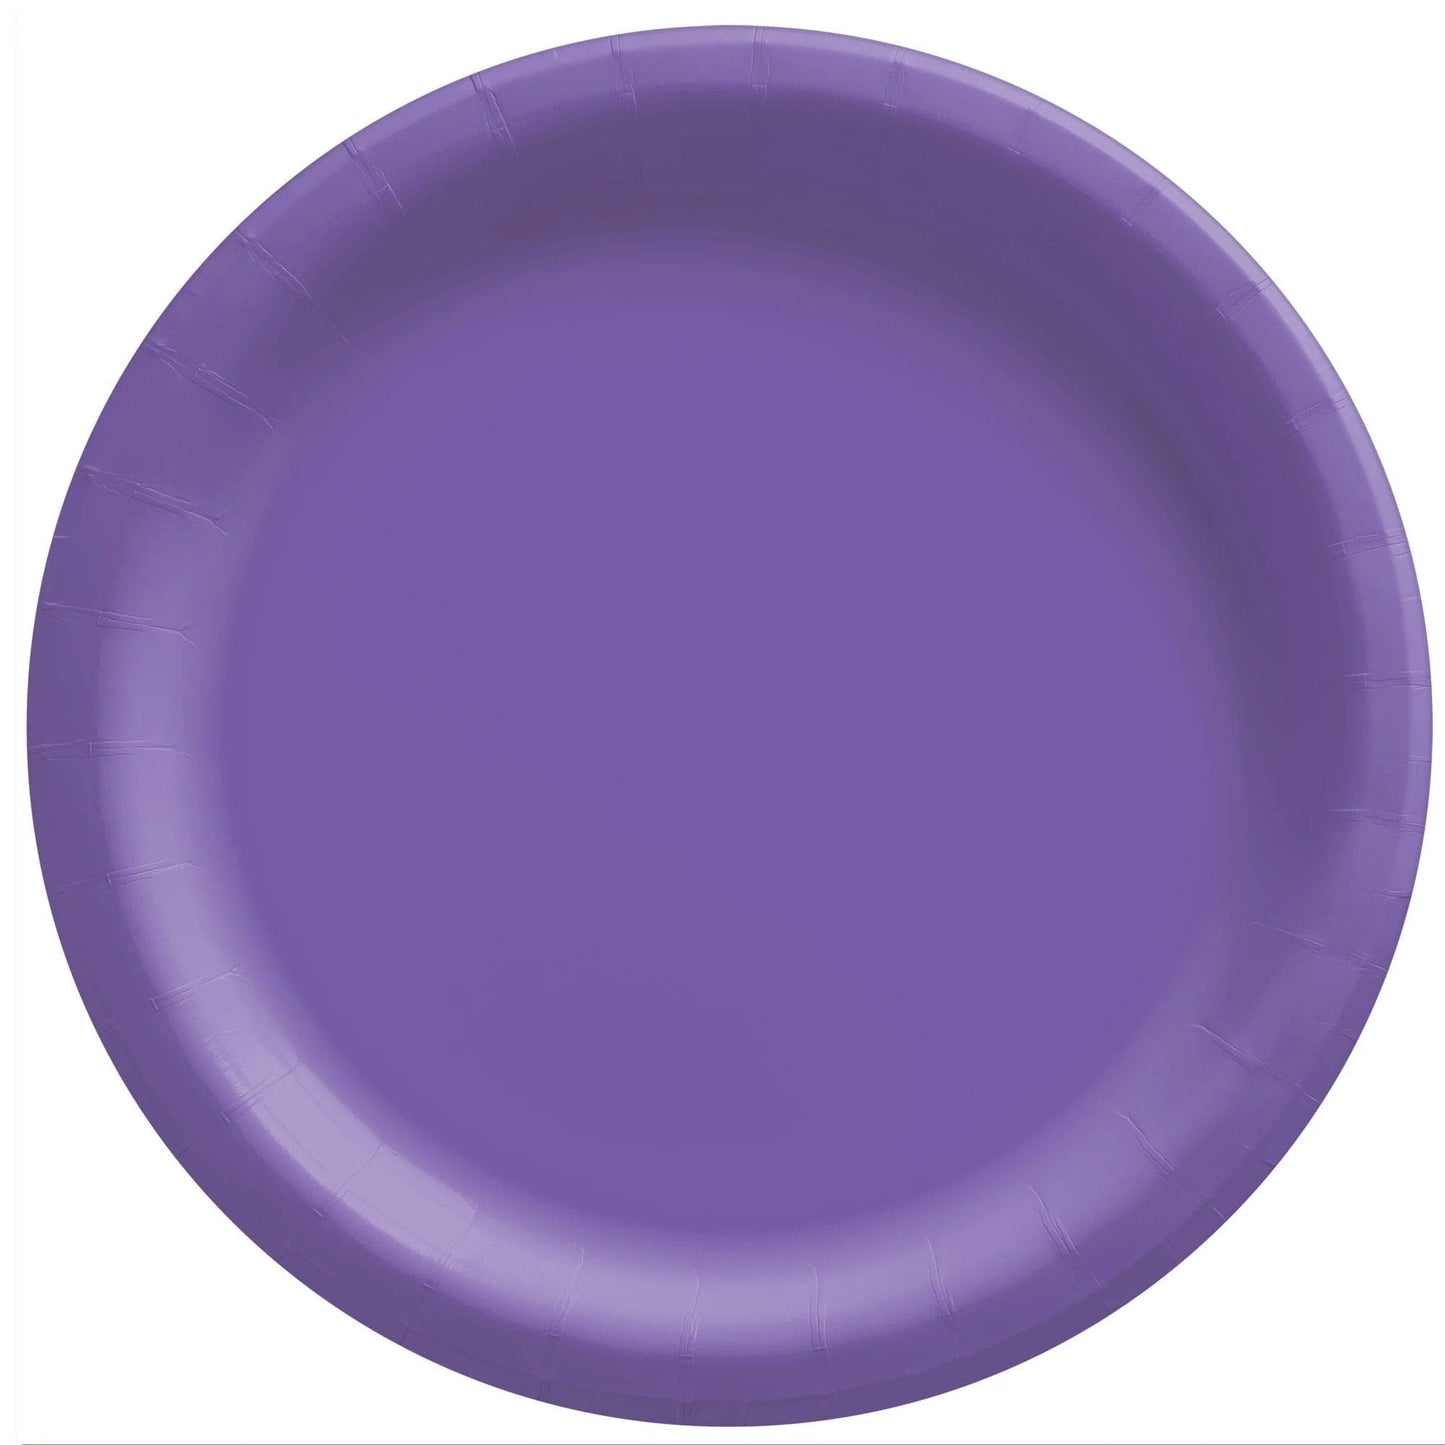 Extra Sturdy New Purple Party 10in Paper Plates, 50 ct